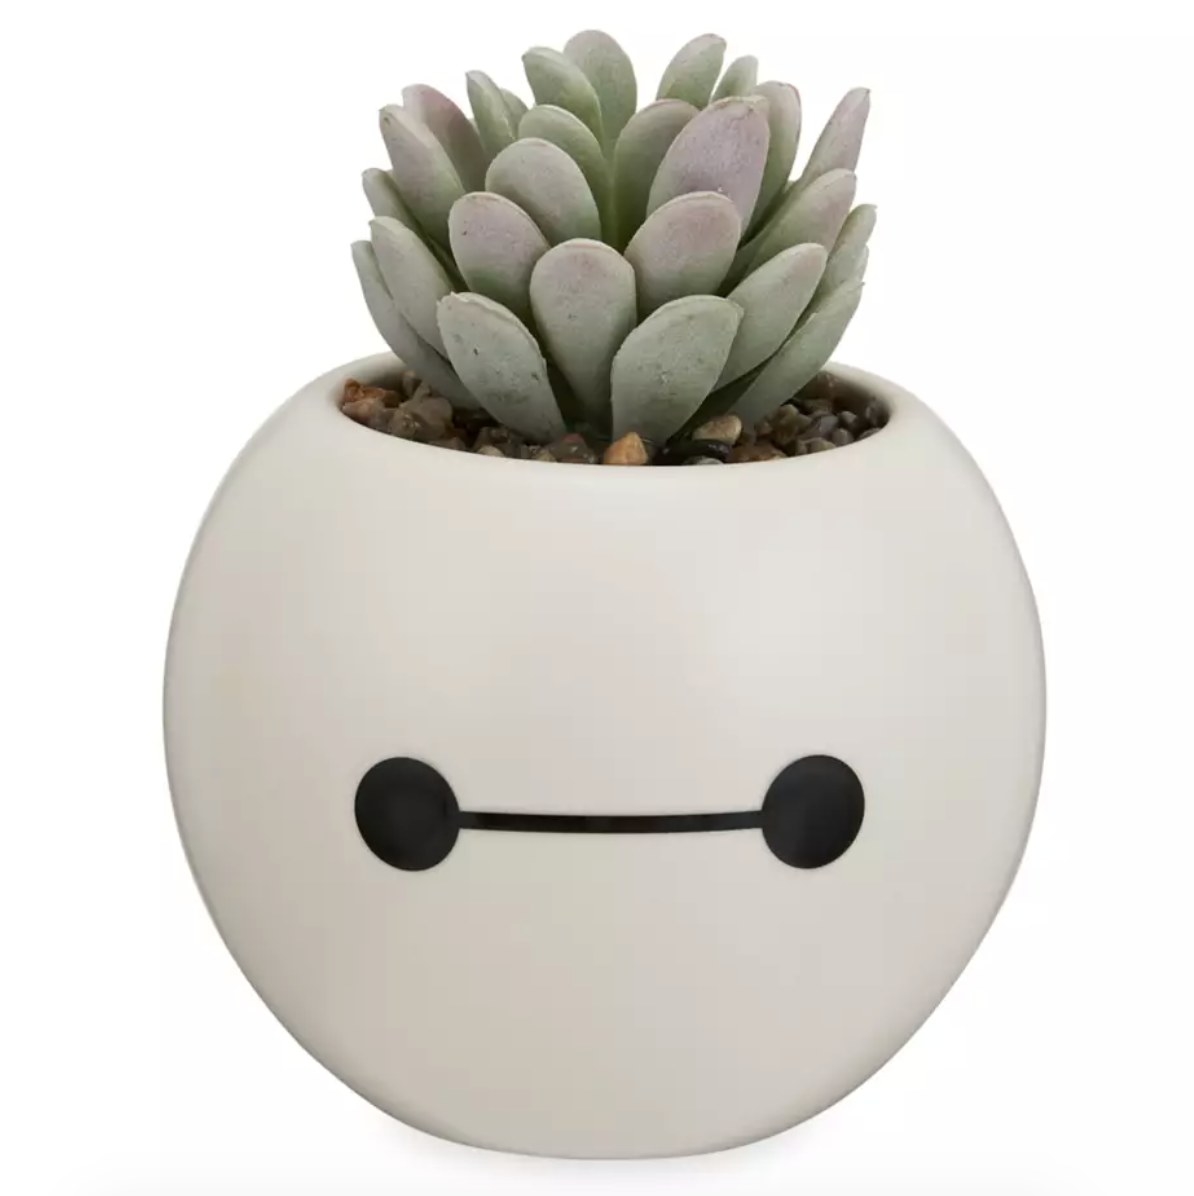 the Baymax planter which looks like Baymax&#x27;s head